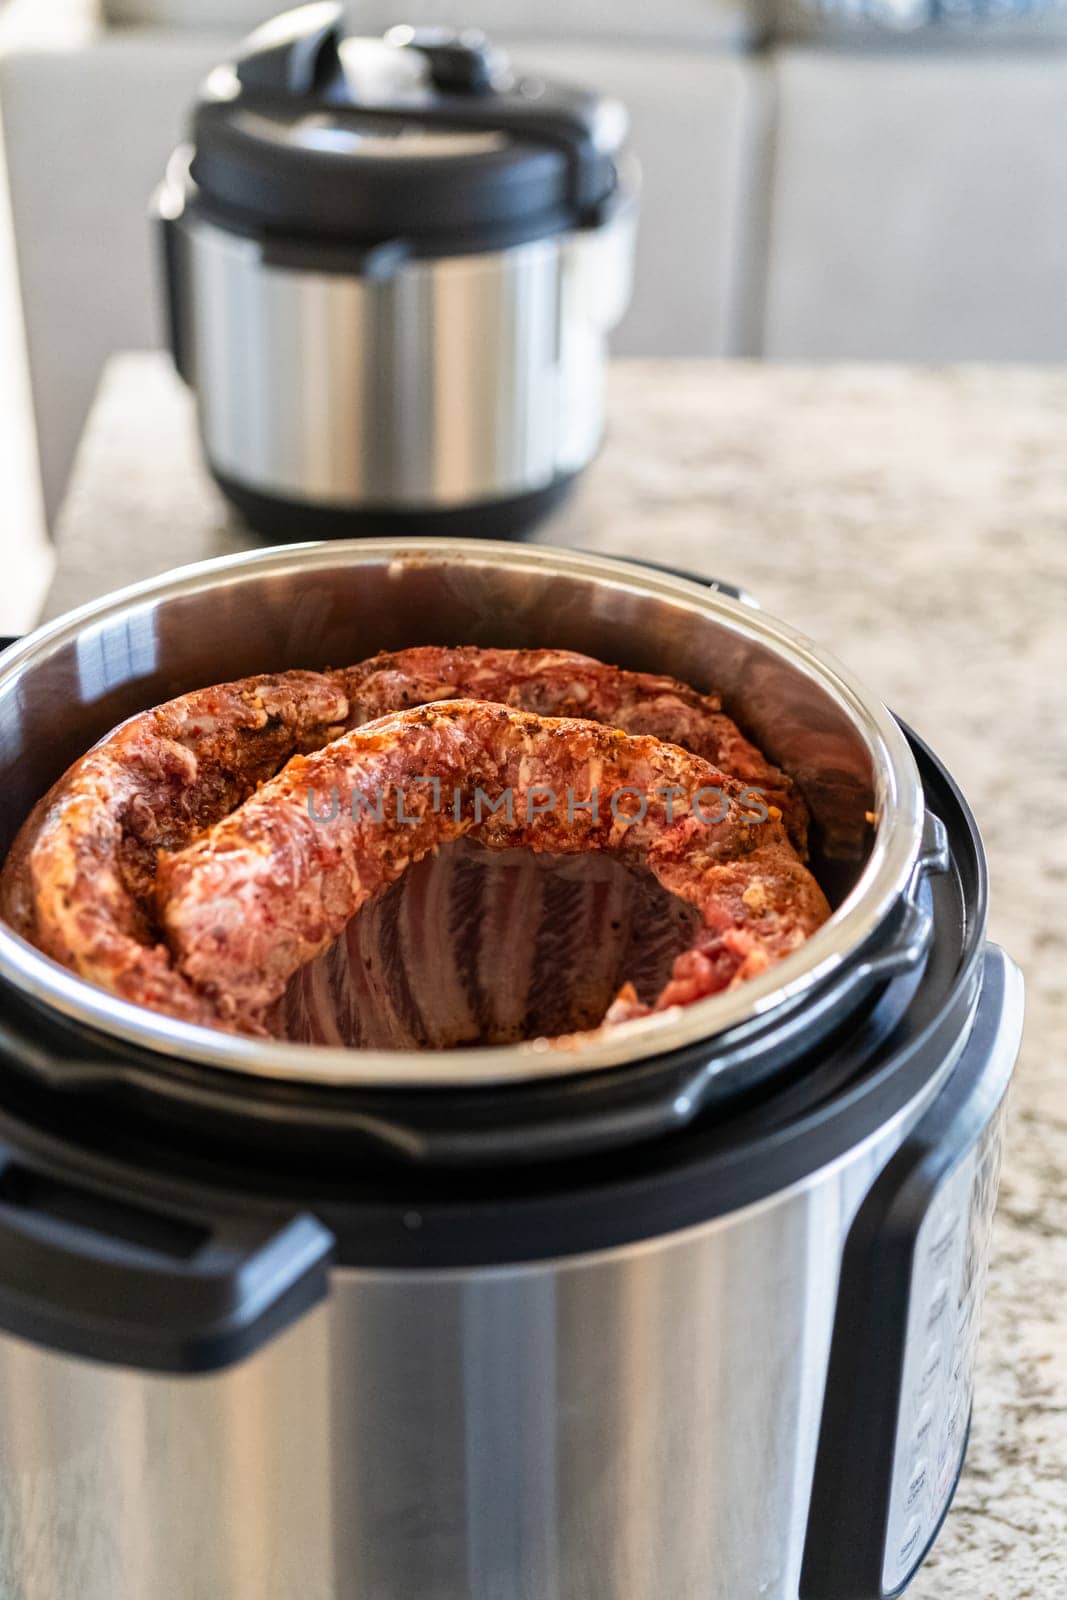 In a sleek modern kitchen, we're adding an extra layer of flavor to succulent baby back ribs by infusing them with a medley of spices in a multicooker—a mouthwatering feast in the making.